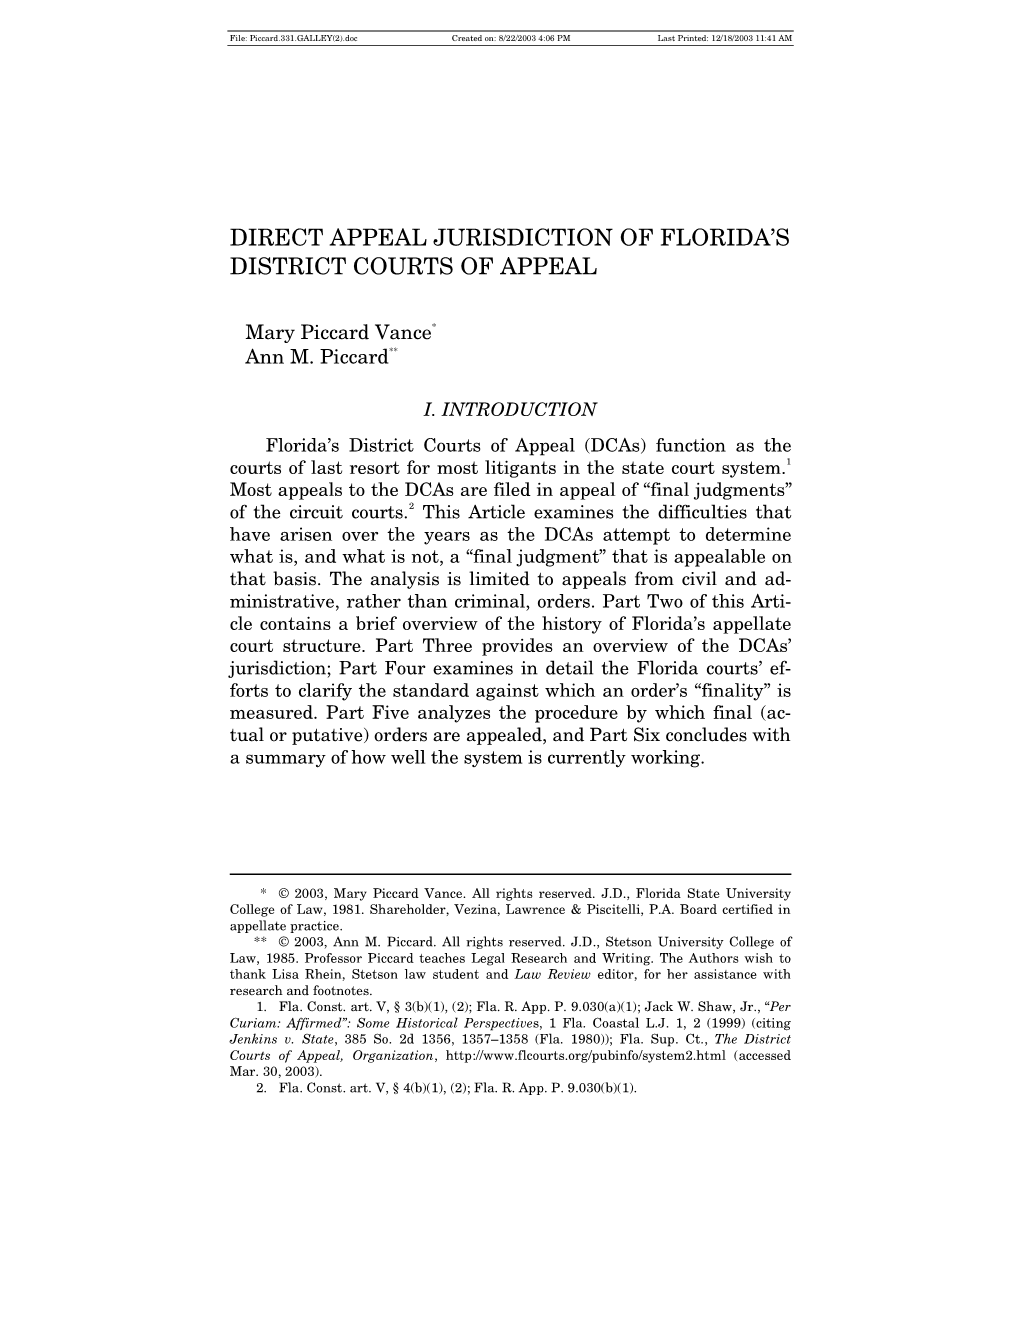 Direct Appeal Jurisdiction of Florida's District Courts Of